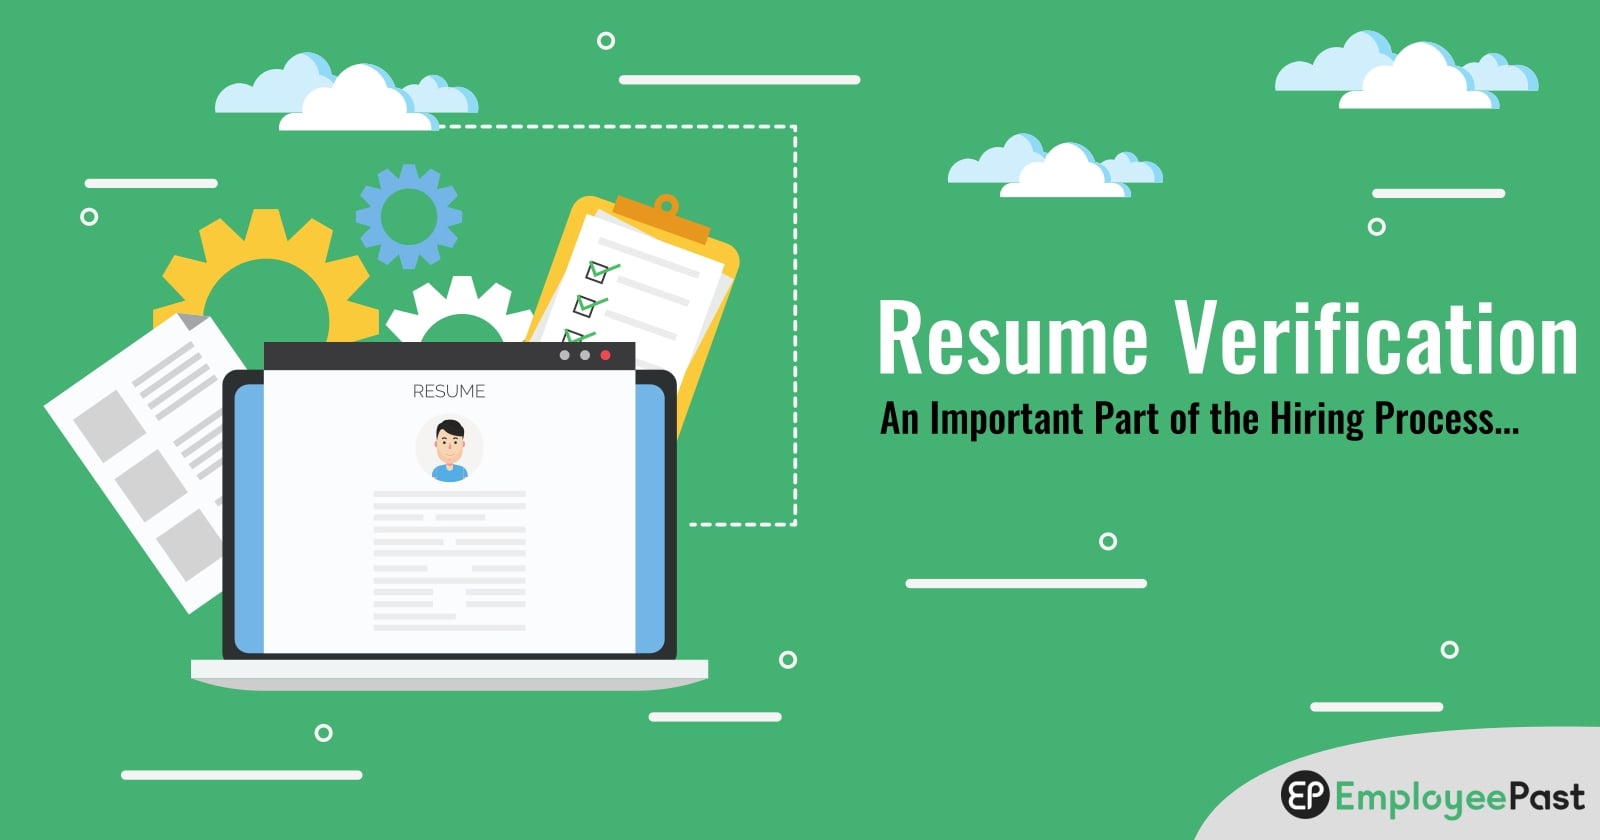 Resume Verification: An Important Part of the Hiring Process